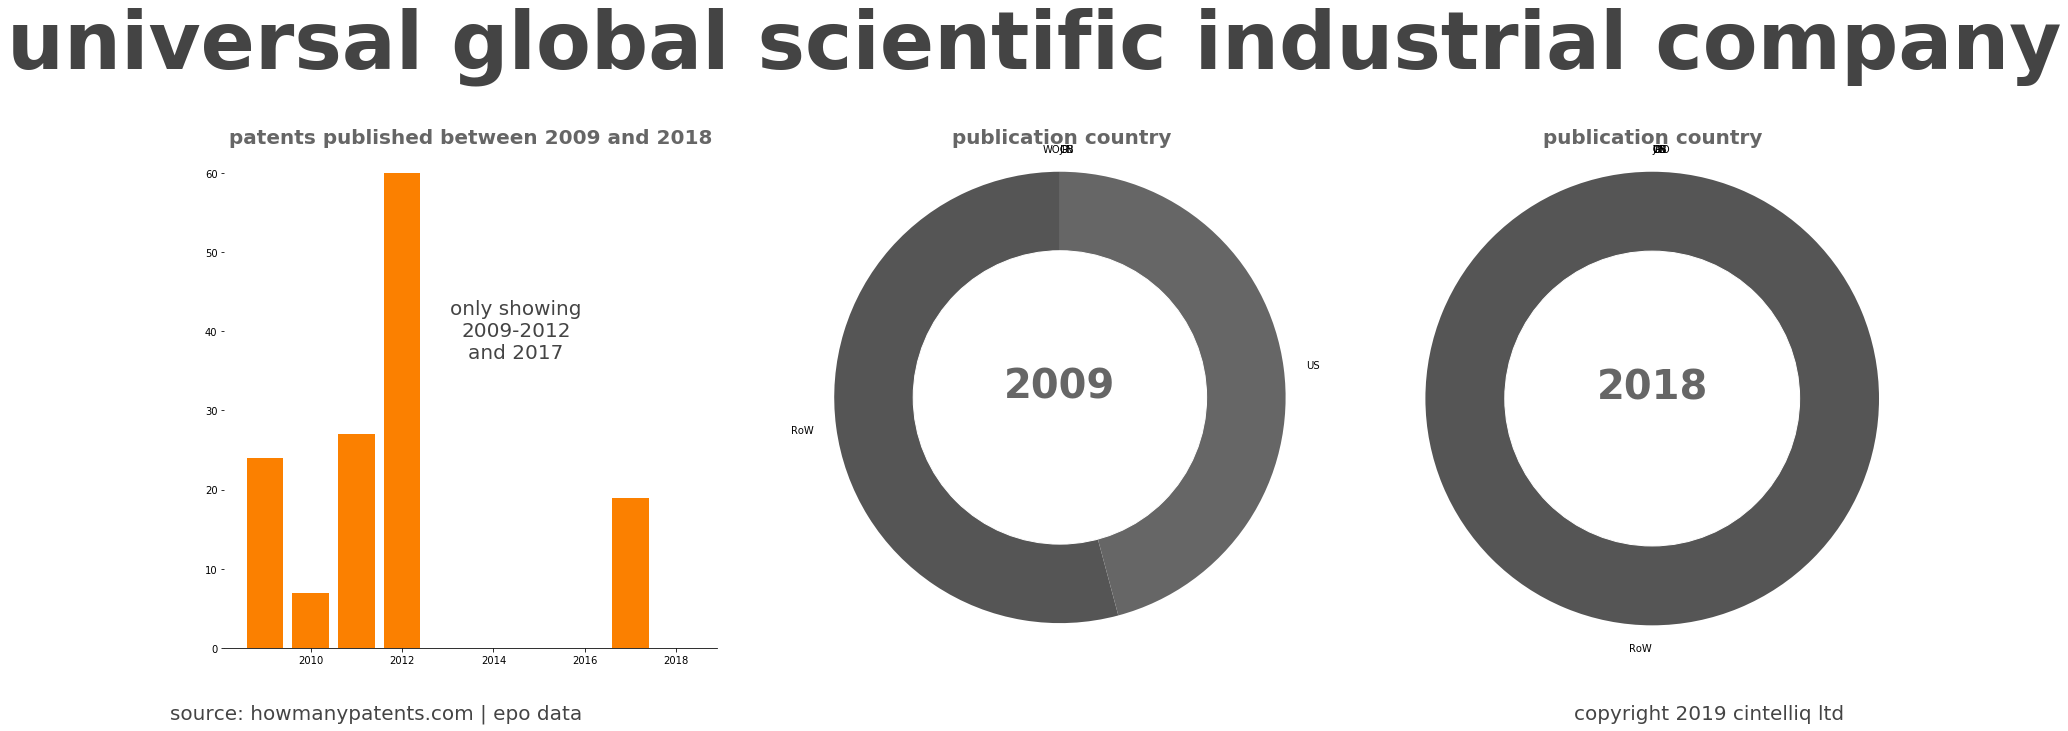 summary of patents for Universal Global Scientific Industrial Company